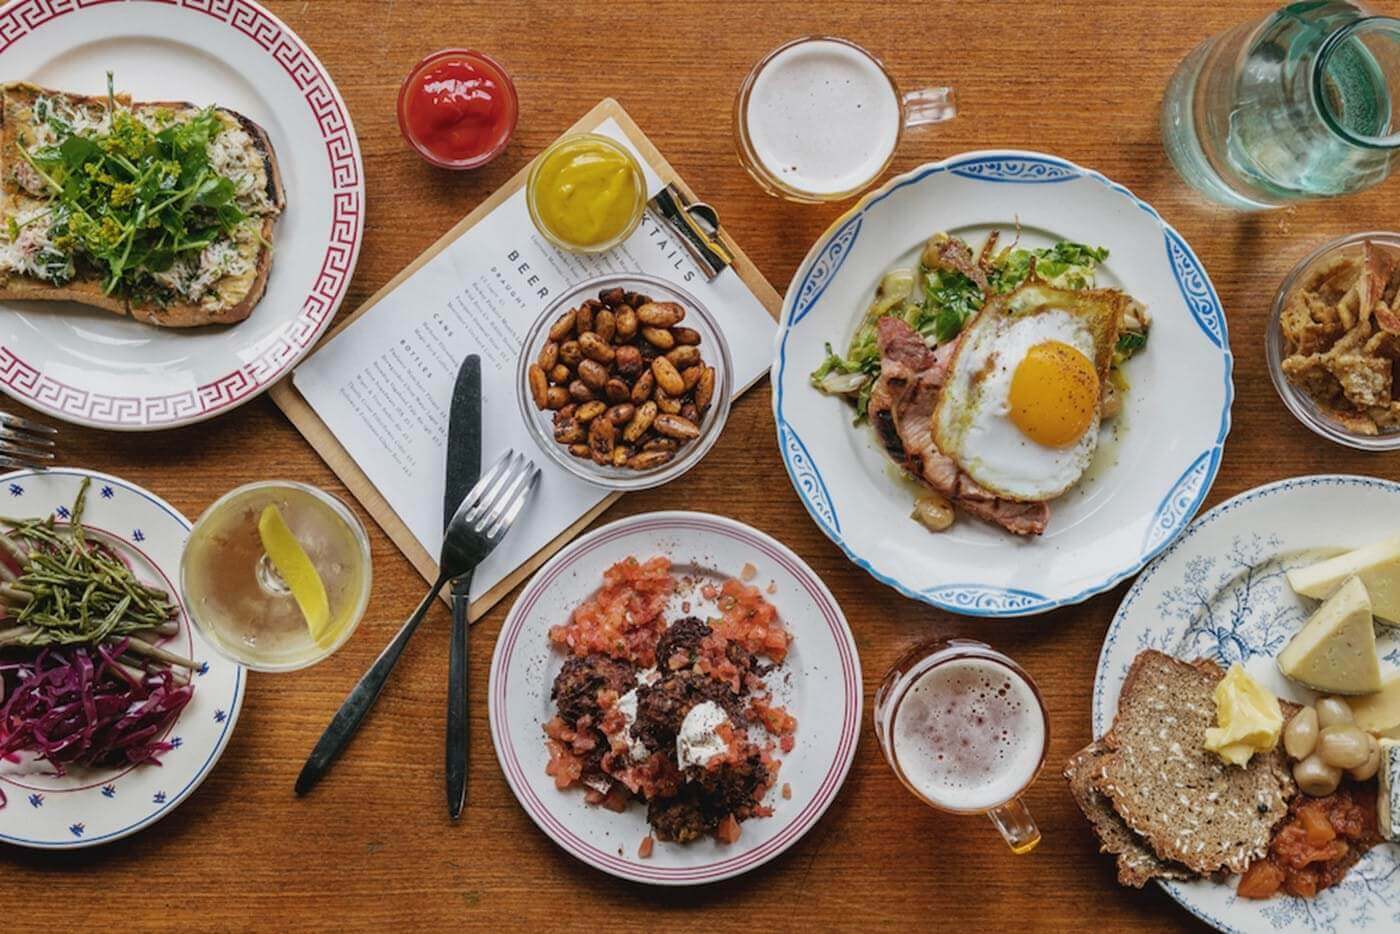 Bottomless Brunch at Coin Laundry